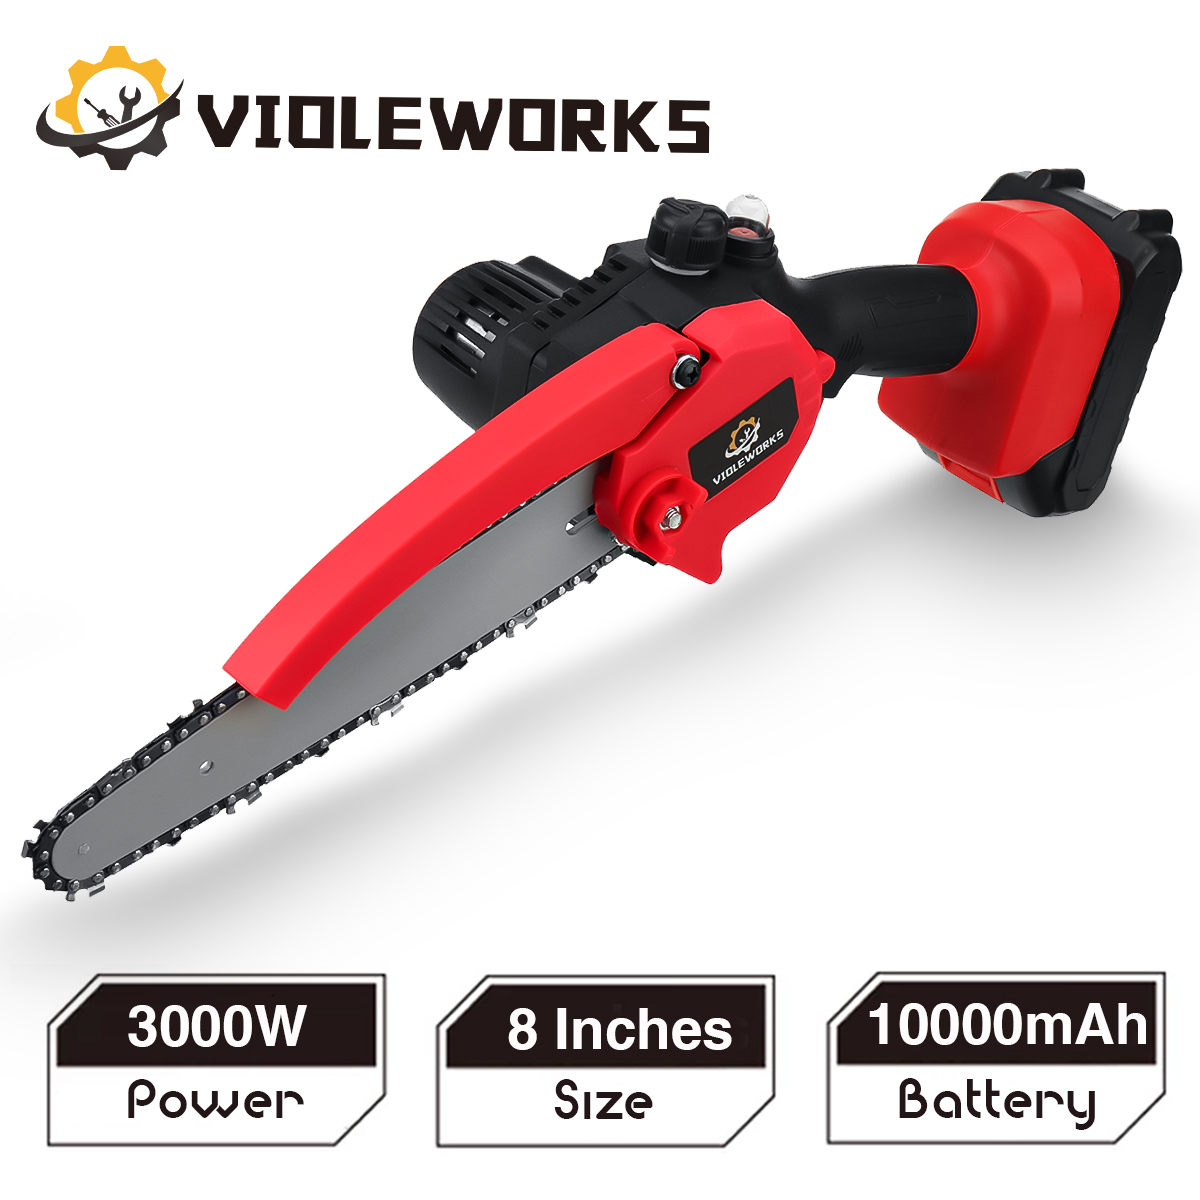 VIOLEWORKS-8-Inch-Portable-Electric-Saw-Pruning-Chain-Saw-Rechargeable-Woodworking-Power-Tools-Wood--1931074-1